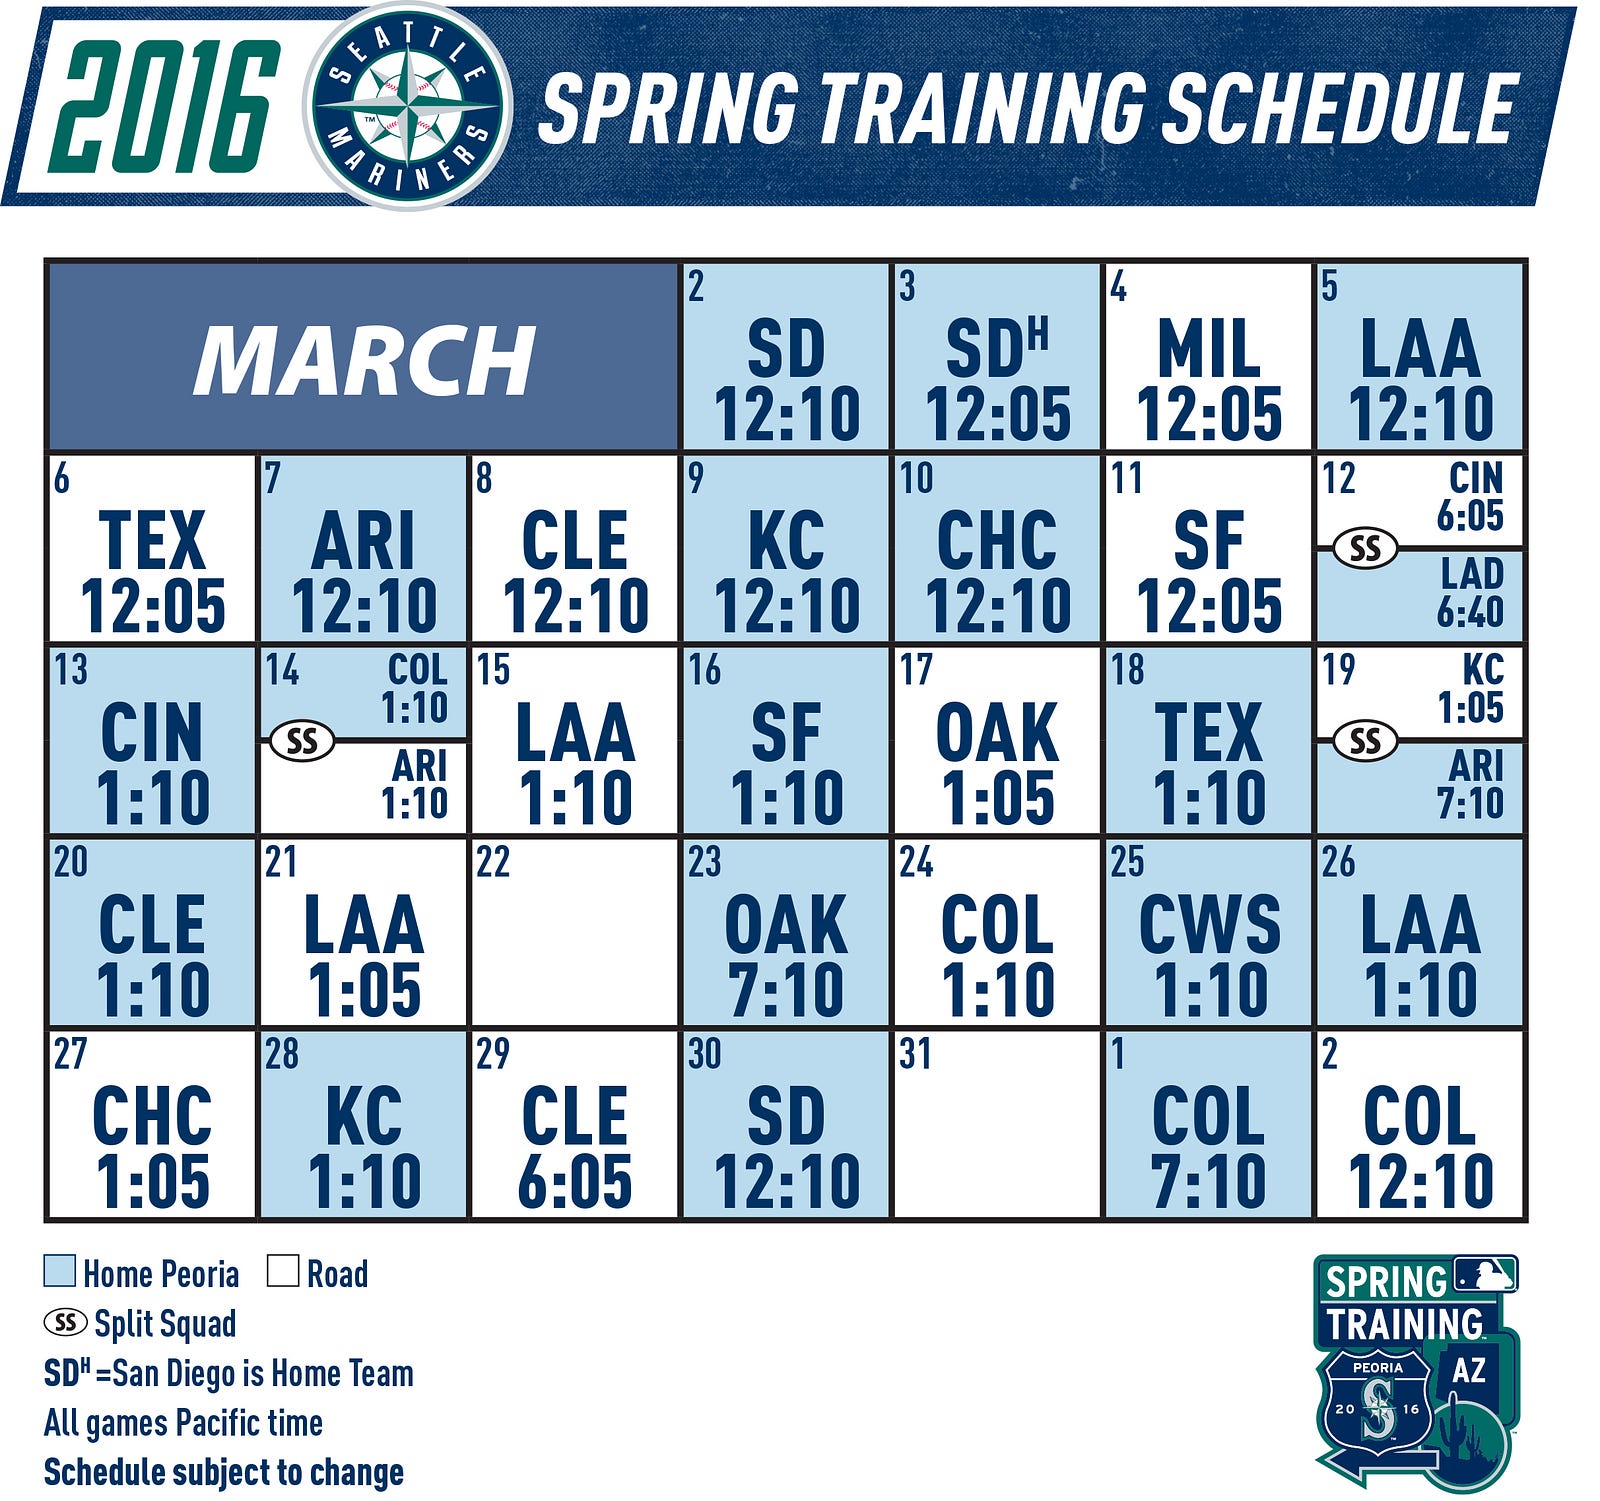 Mariners Announce Spring Training Schedule From the Corner of Edgar